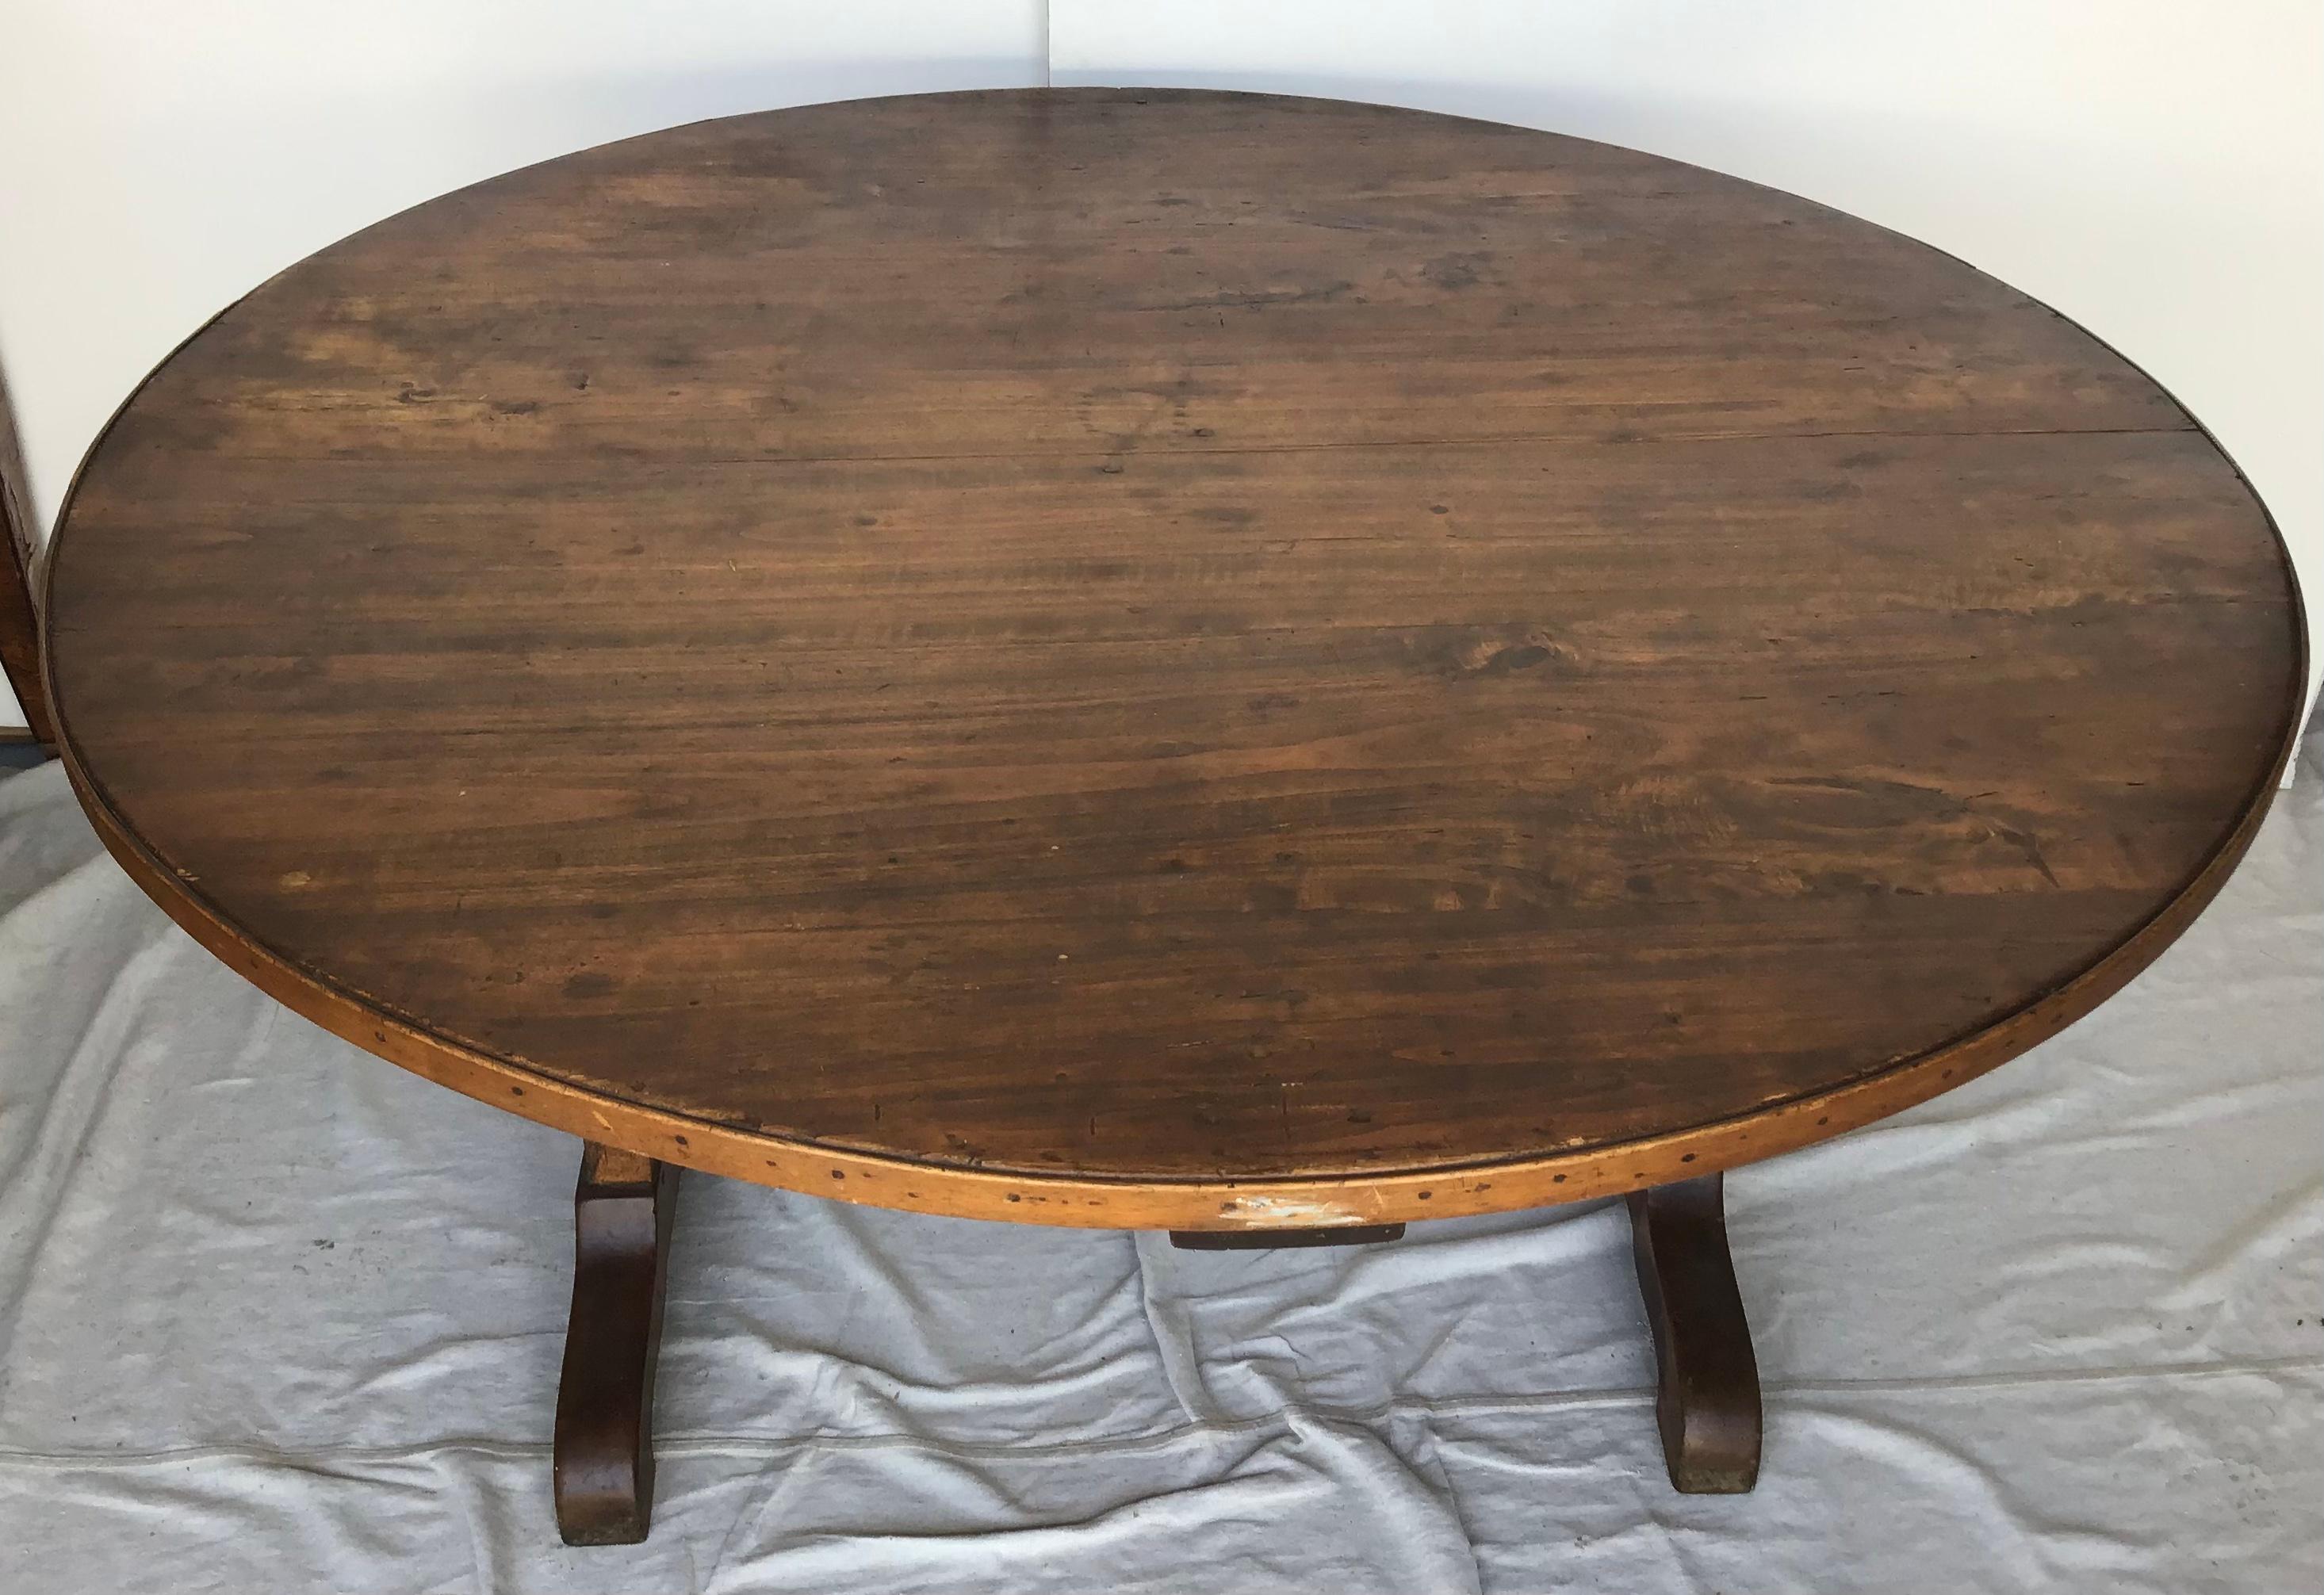 A very grand scale Table Vigneron - Wine Tasting Table from the South of France. Beautifully constructed from walnut in a round shape and tilting top. Terrific as a breakfast table or dining table. Great patina.